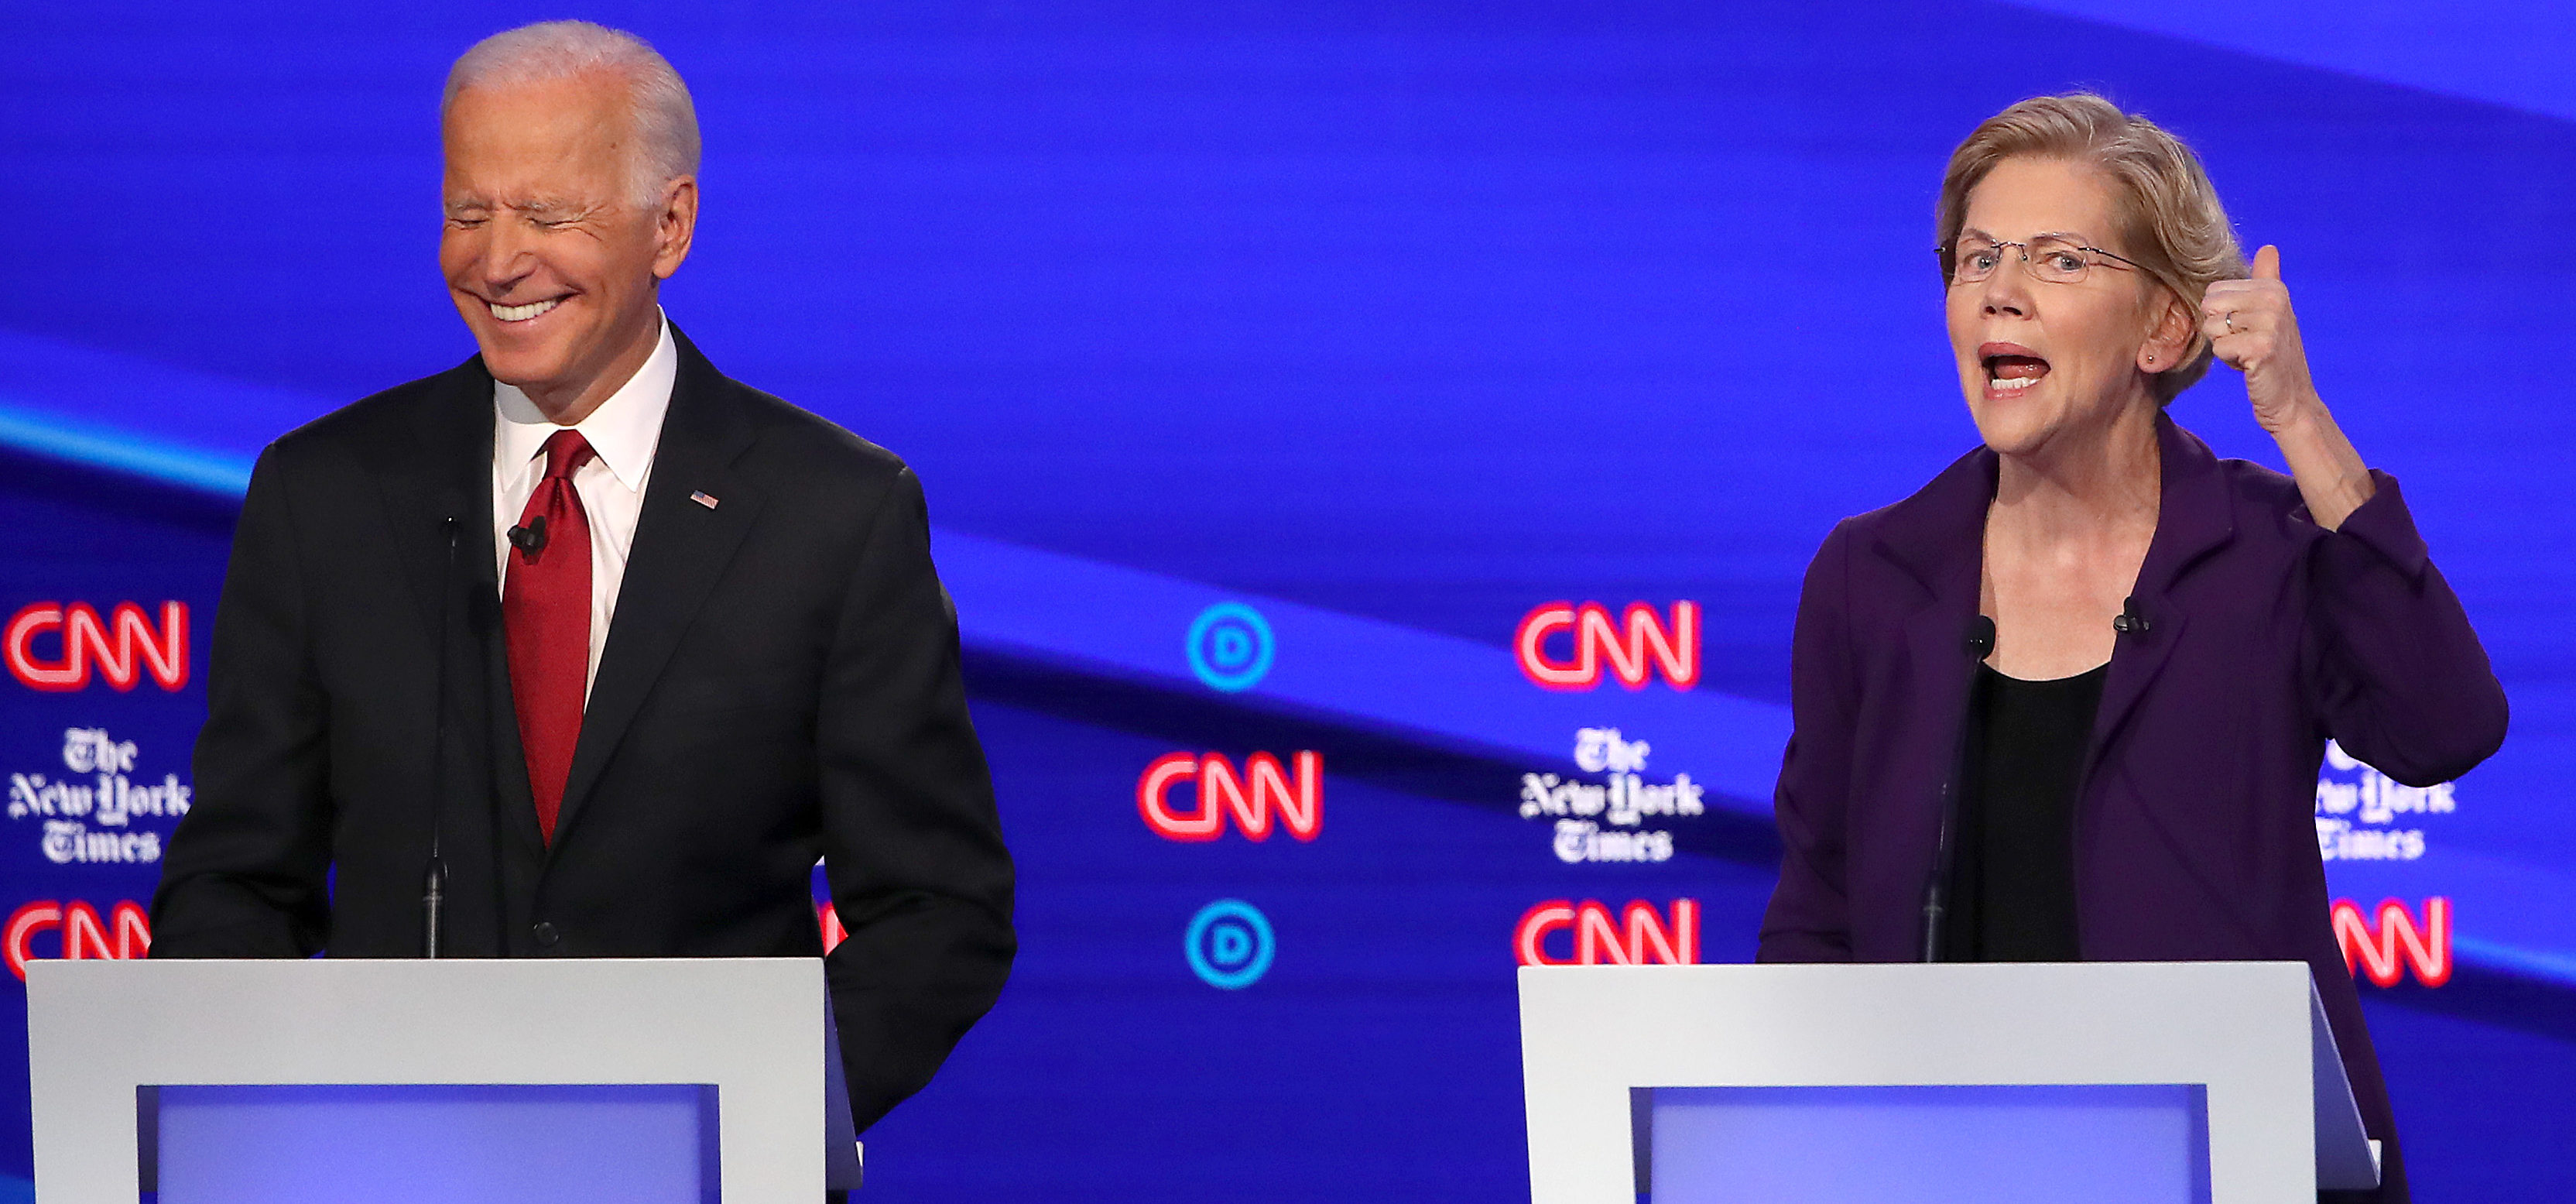 WESTERVILLE, OHIO - OCTOBER 15: Former Vice President Joe Biden and Sen. Elizabeth Warren (D-MA) react on stage during the Democratic Presidential Debate at Otterbein University on October 15, 2019 in Westerville, Ohio. A record 12 presidential hopefuls are participating in the debate hosted by CNN and The New York Times. (Photo by Win McNamee/Getty Images)